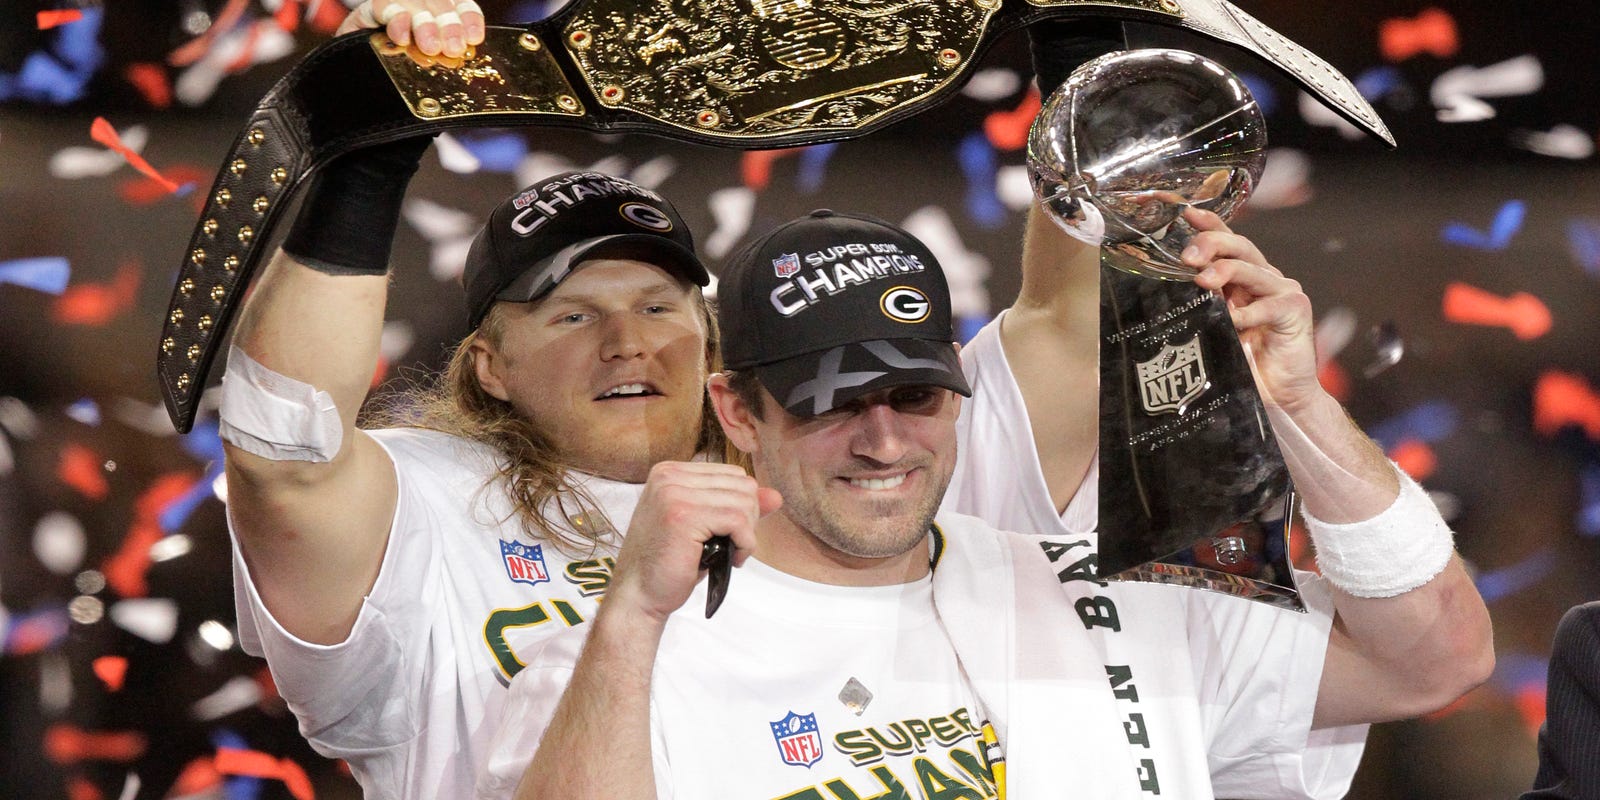 50 greatest Wisconsin sports moments No. 2, Packers win Super Bowl 45